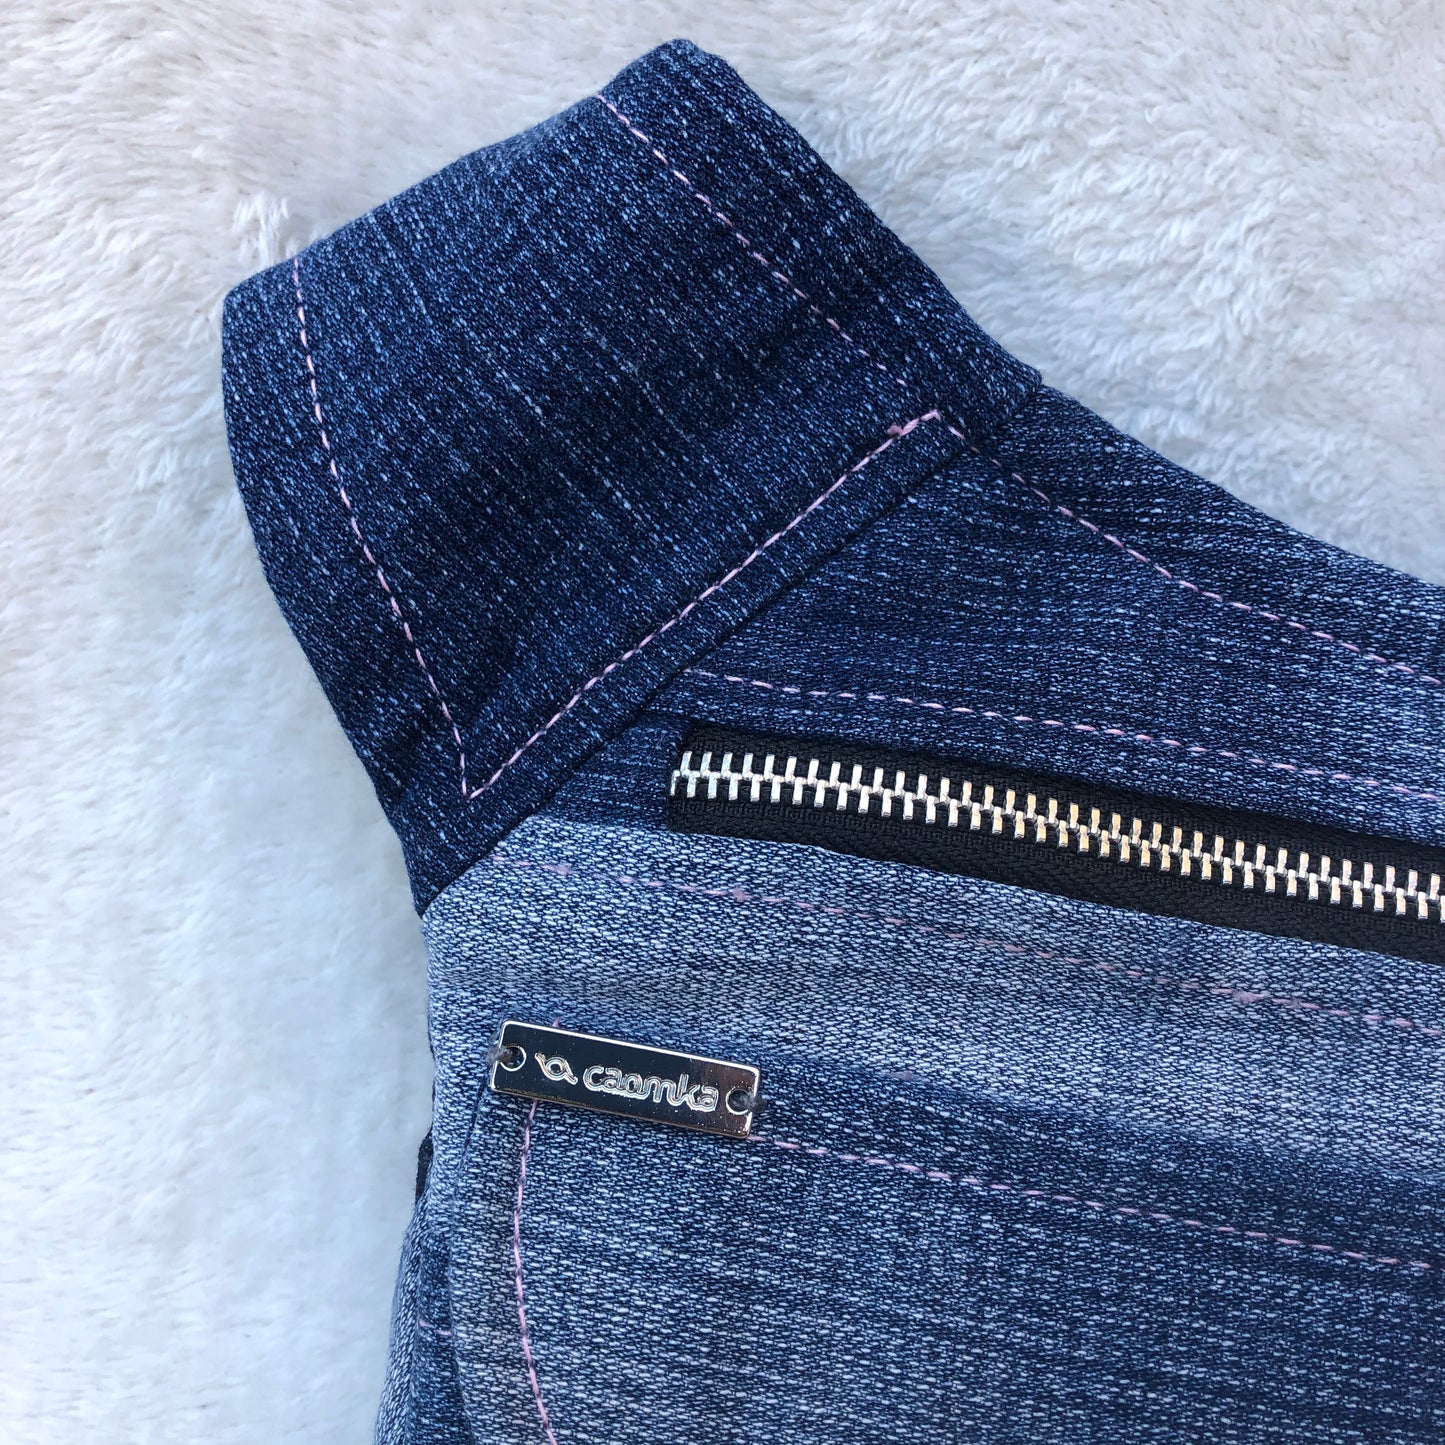 PACK "Recycled Jeans" Einzelstücke Nr. 7089